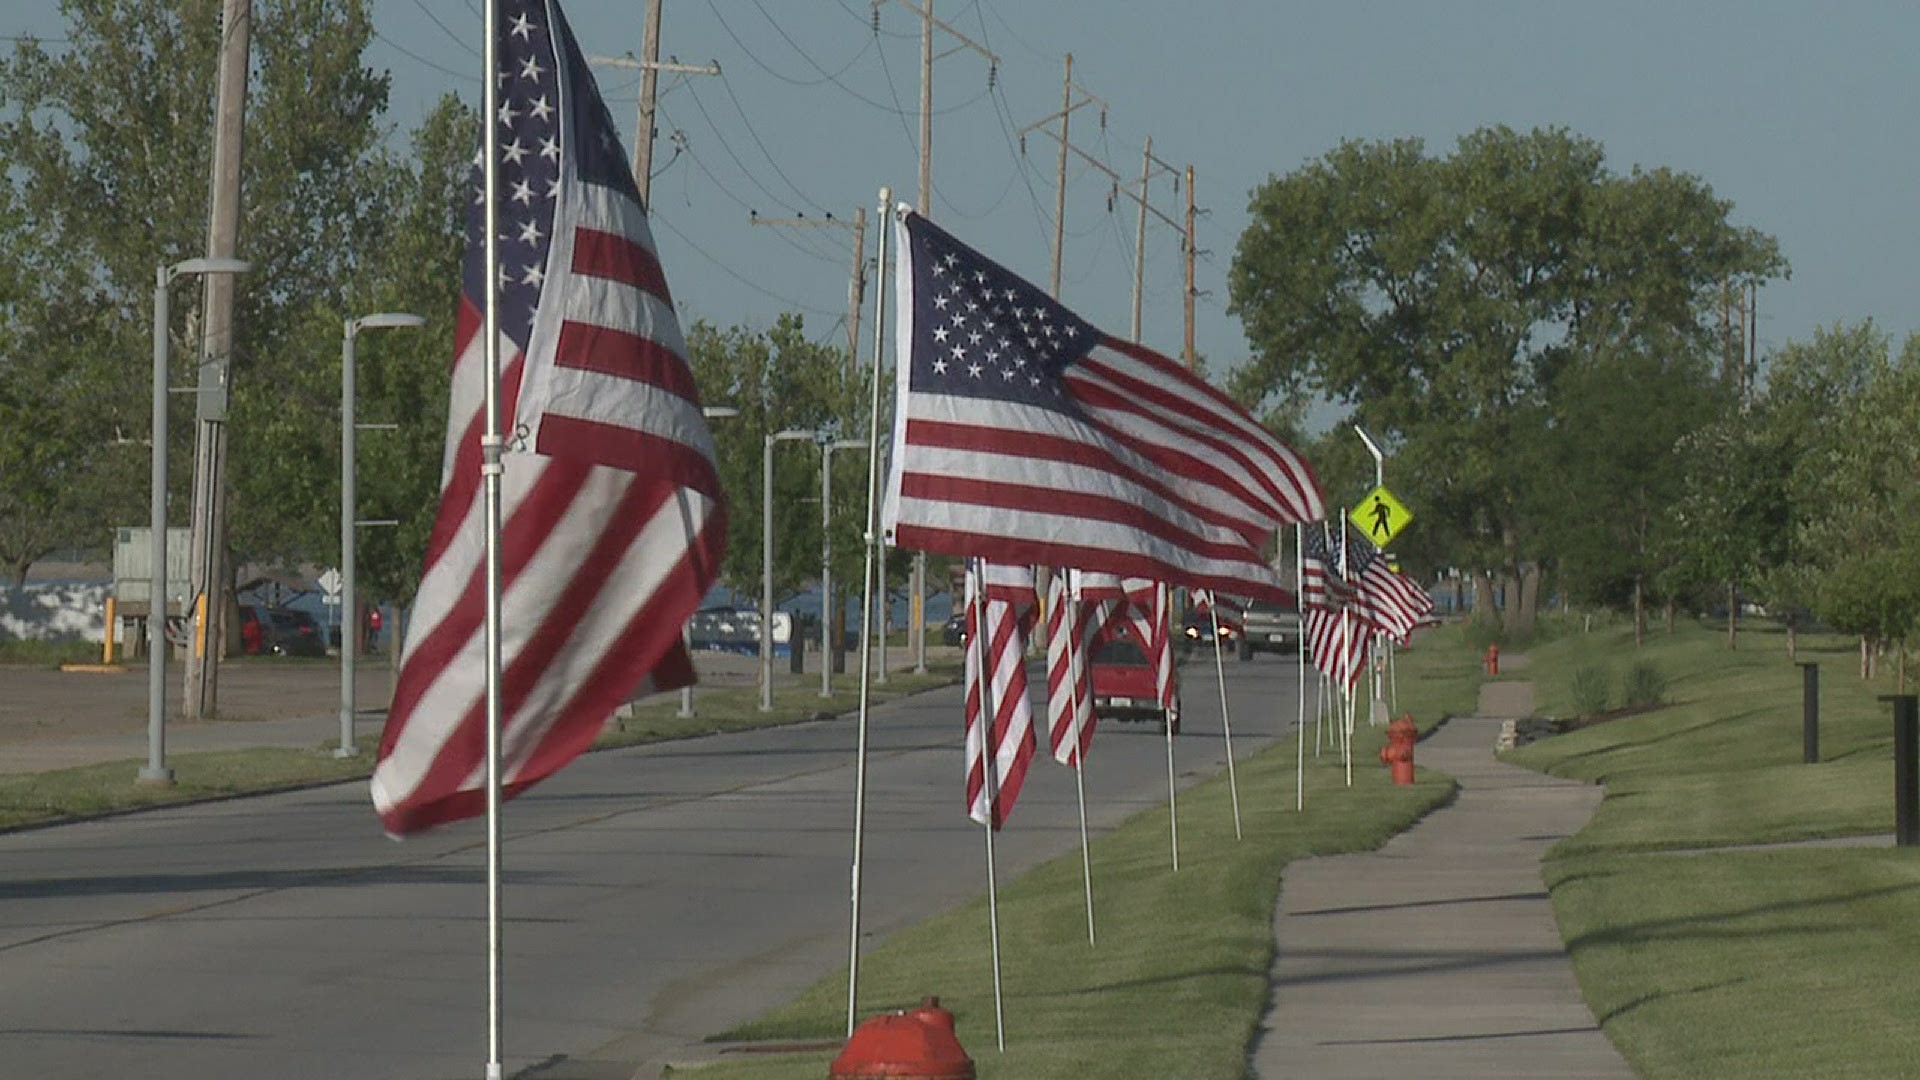 WATCH: Video shows the U.S. Flag flying on River Drive in Moline